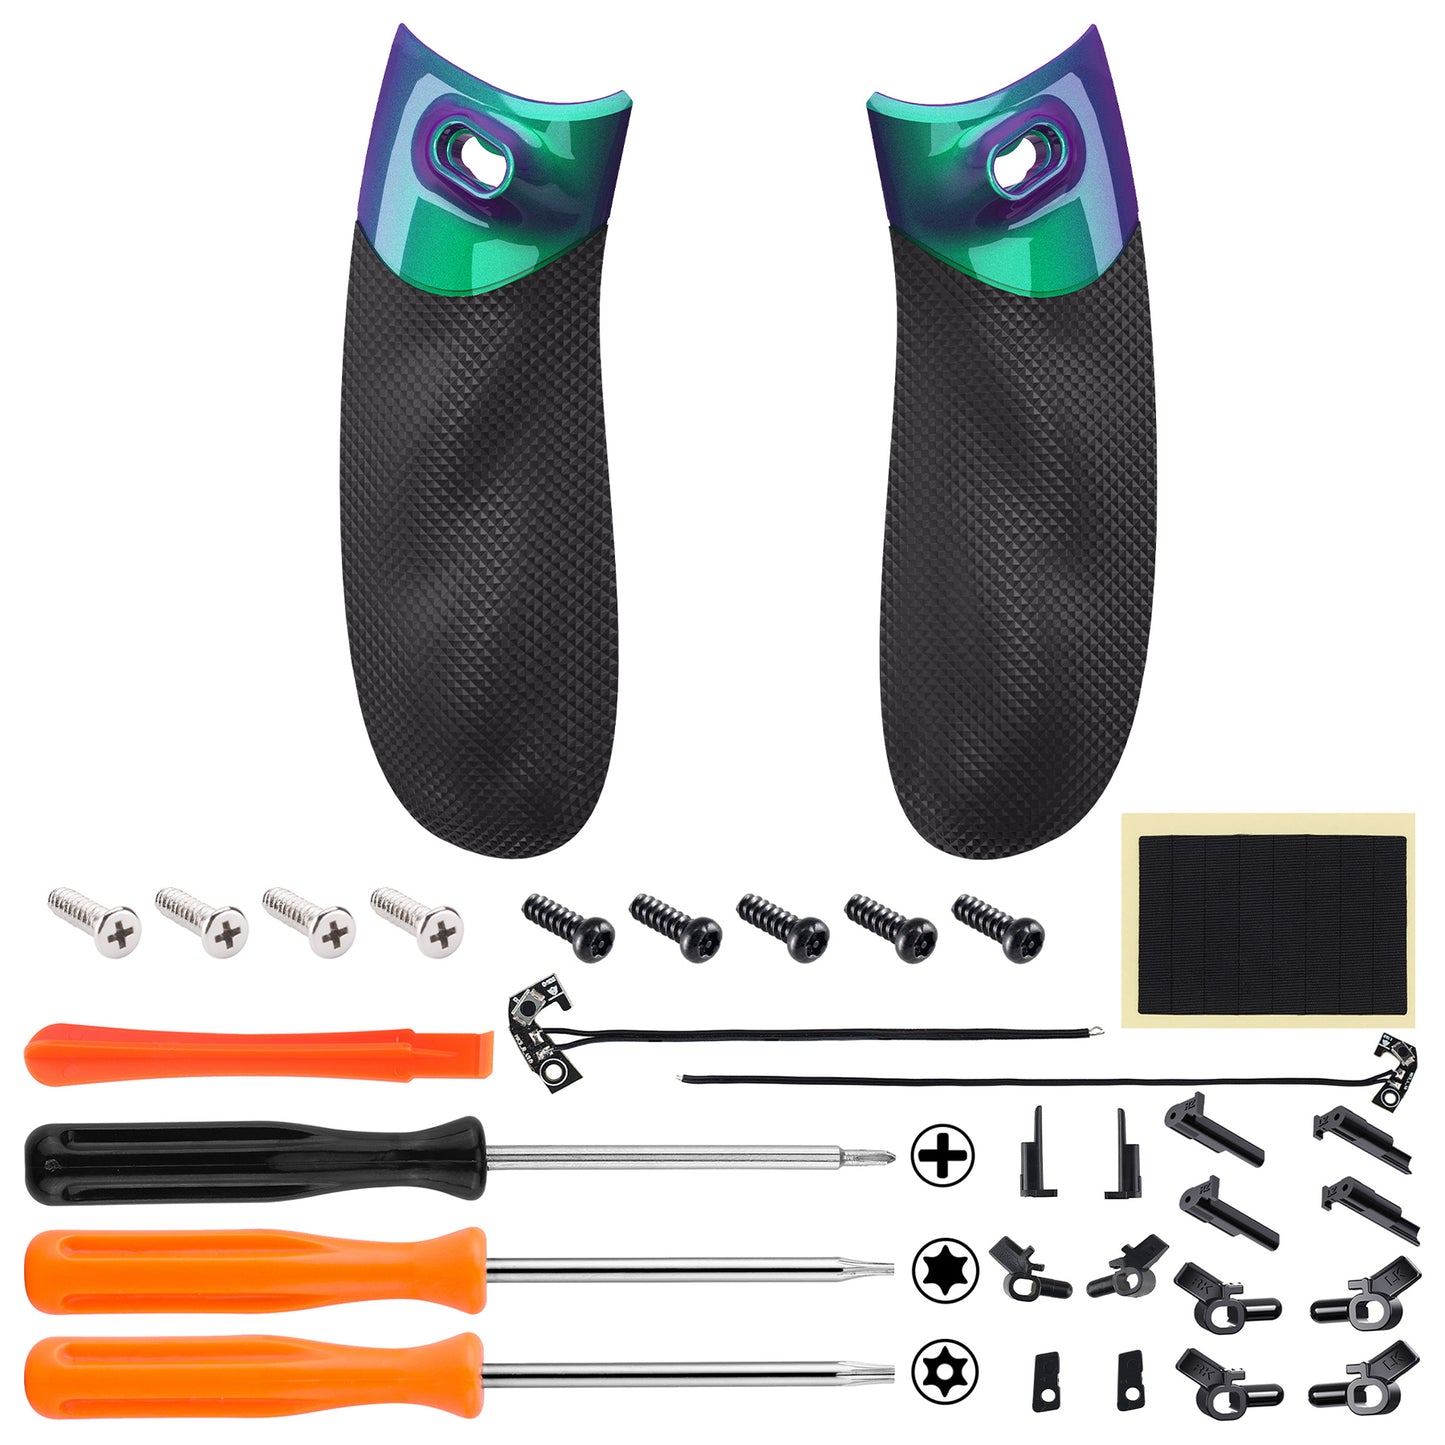 eXtremeRate FLEXOR Clicky Rubberized Side Rails Grips Trigger Stop Kit for Xbox Series X/S Controller & Xbox Core Controller - Chameleon Green Purple eXtremeRate